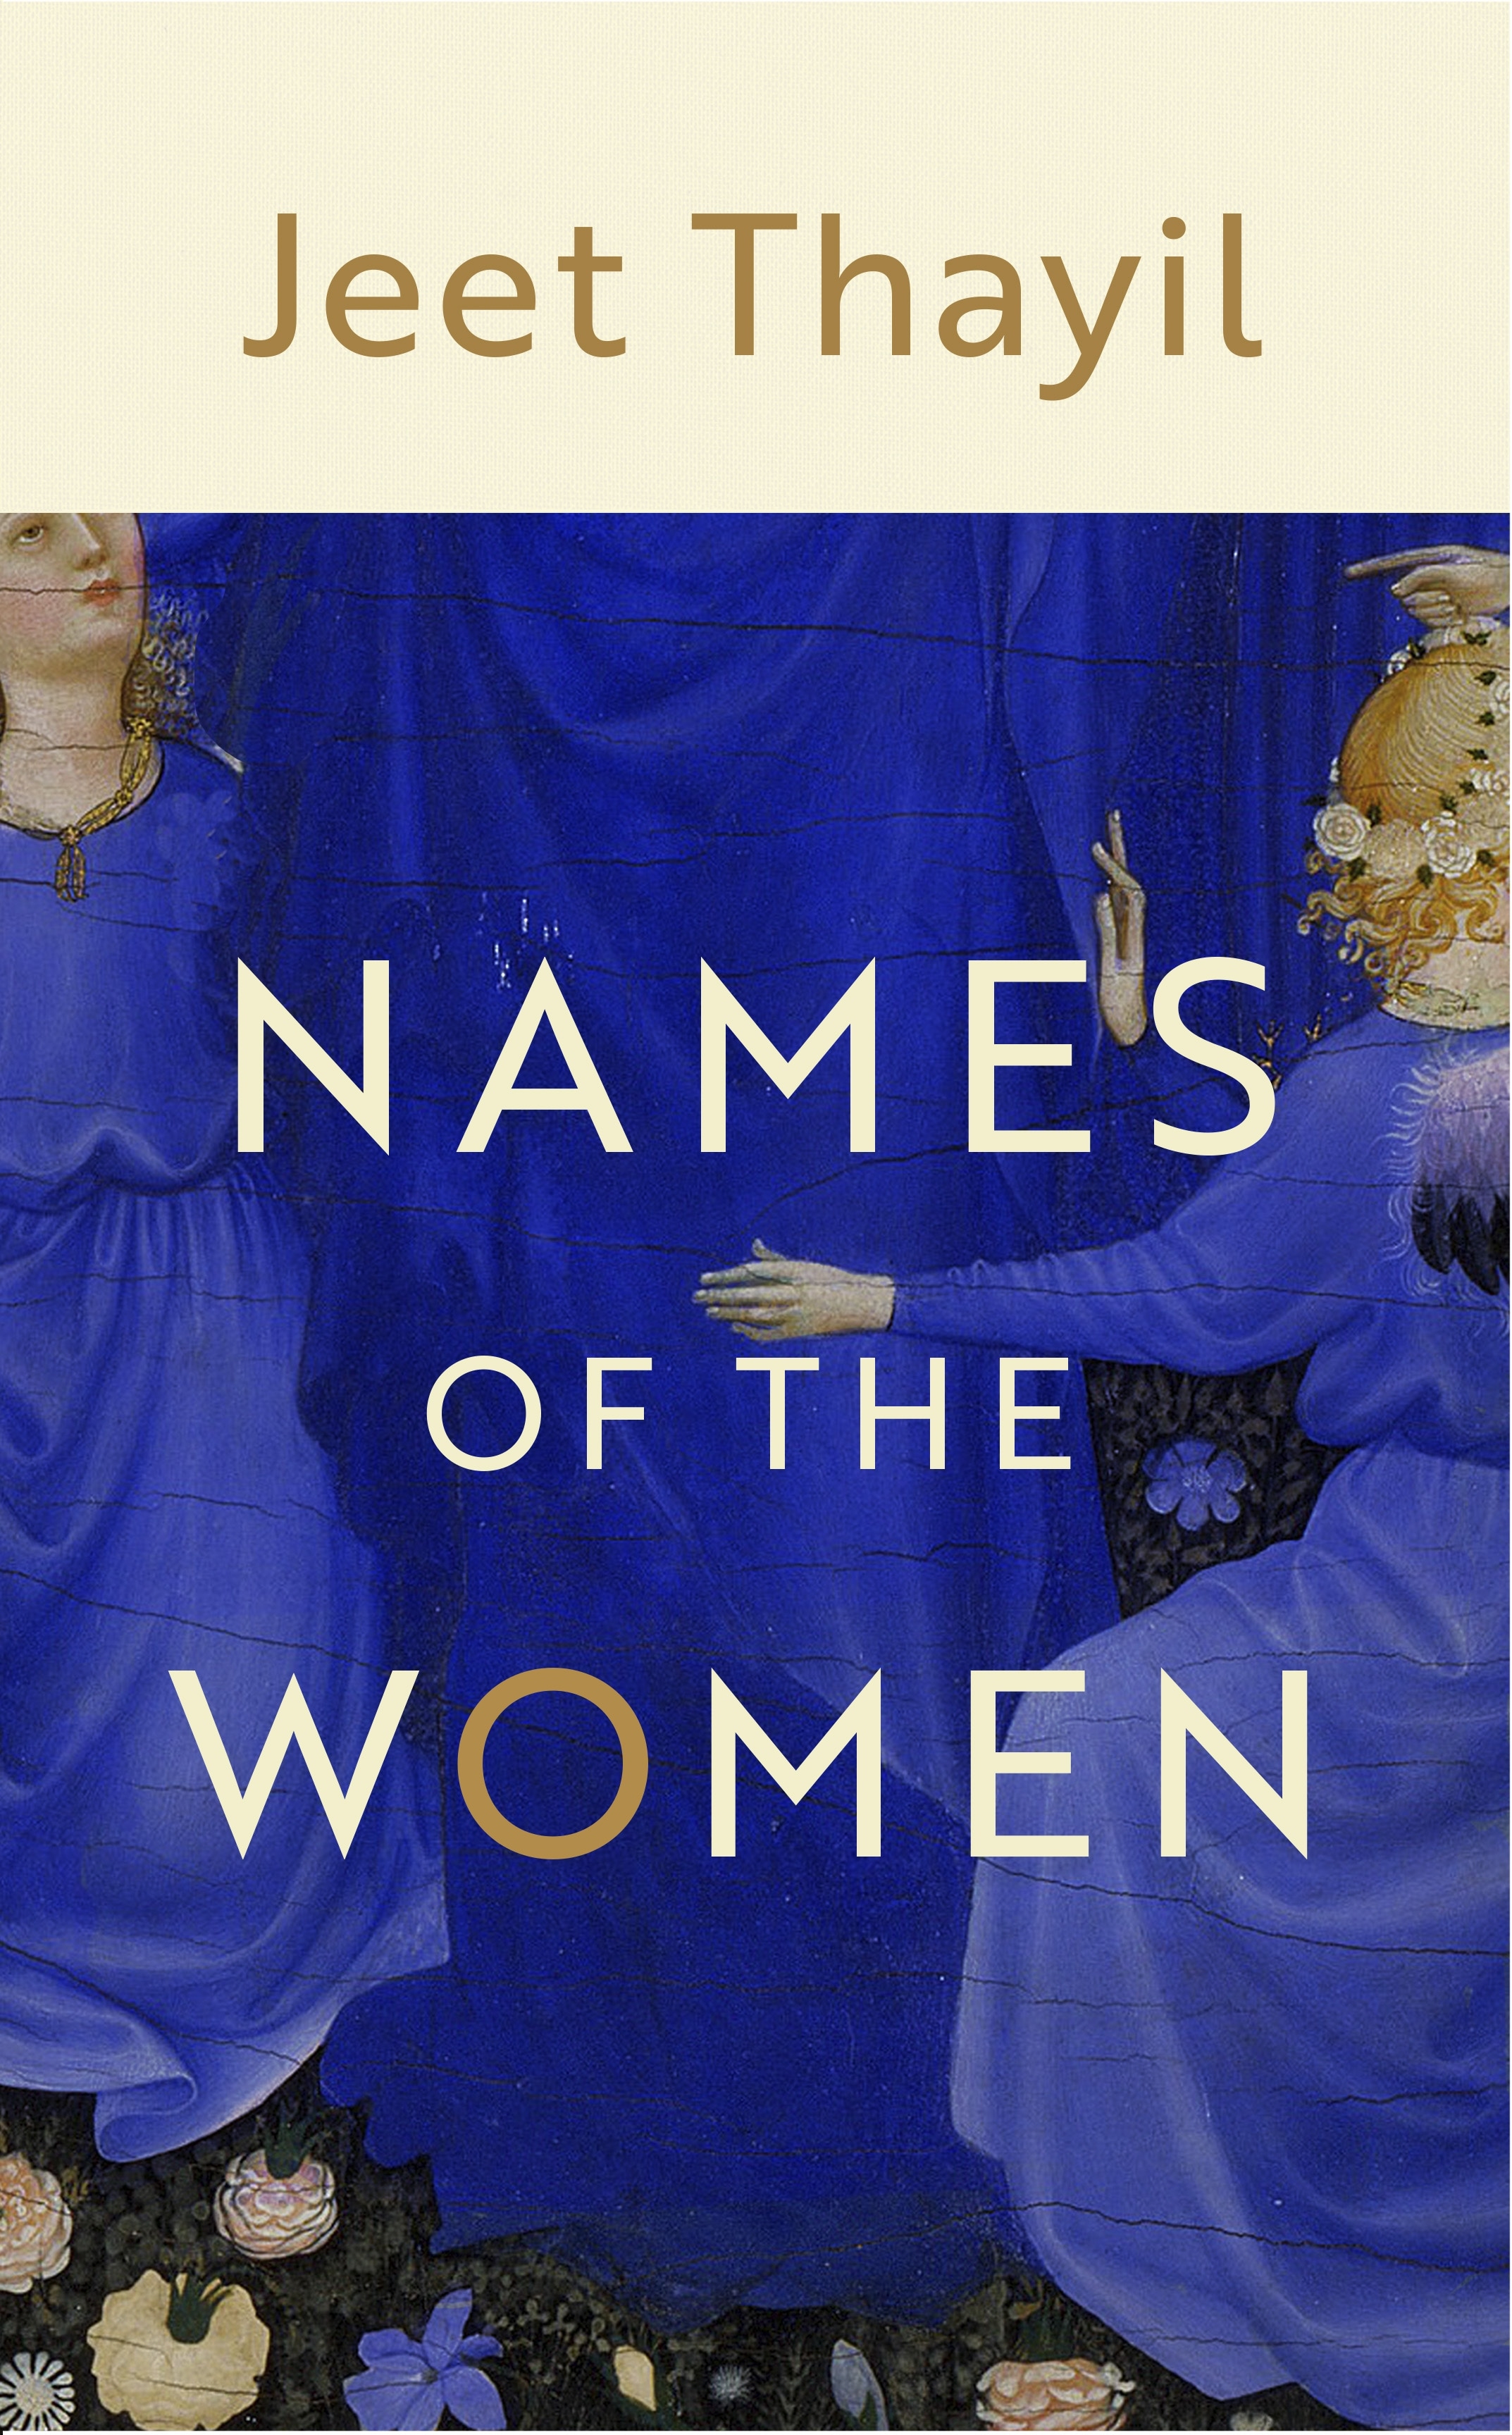 Book “Names of the Women” by Jeet Thayil — March 25, 2021